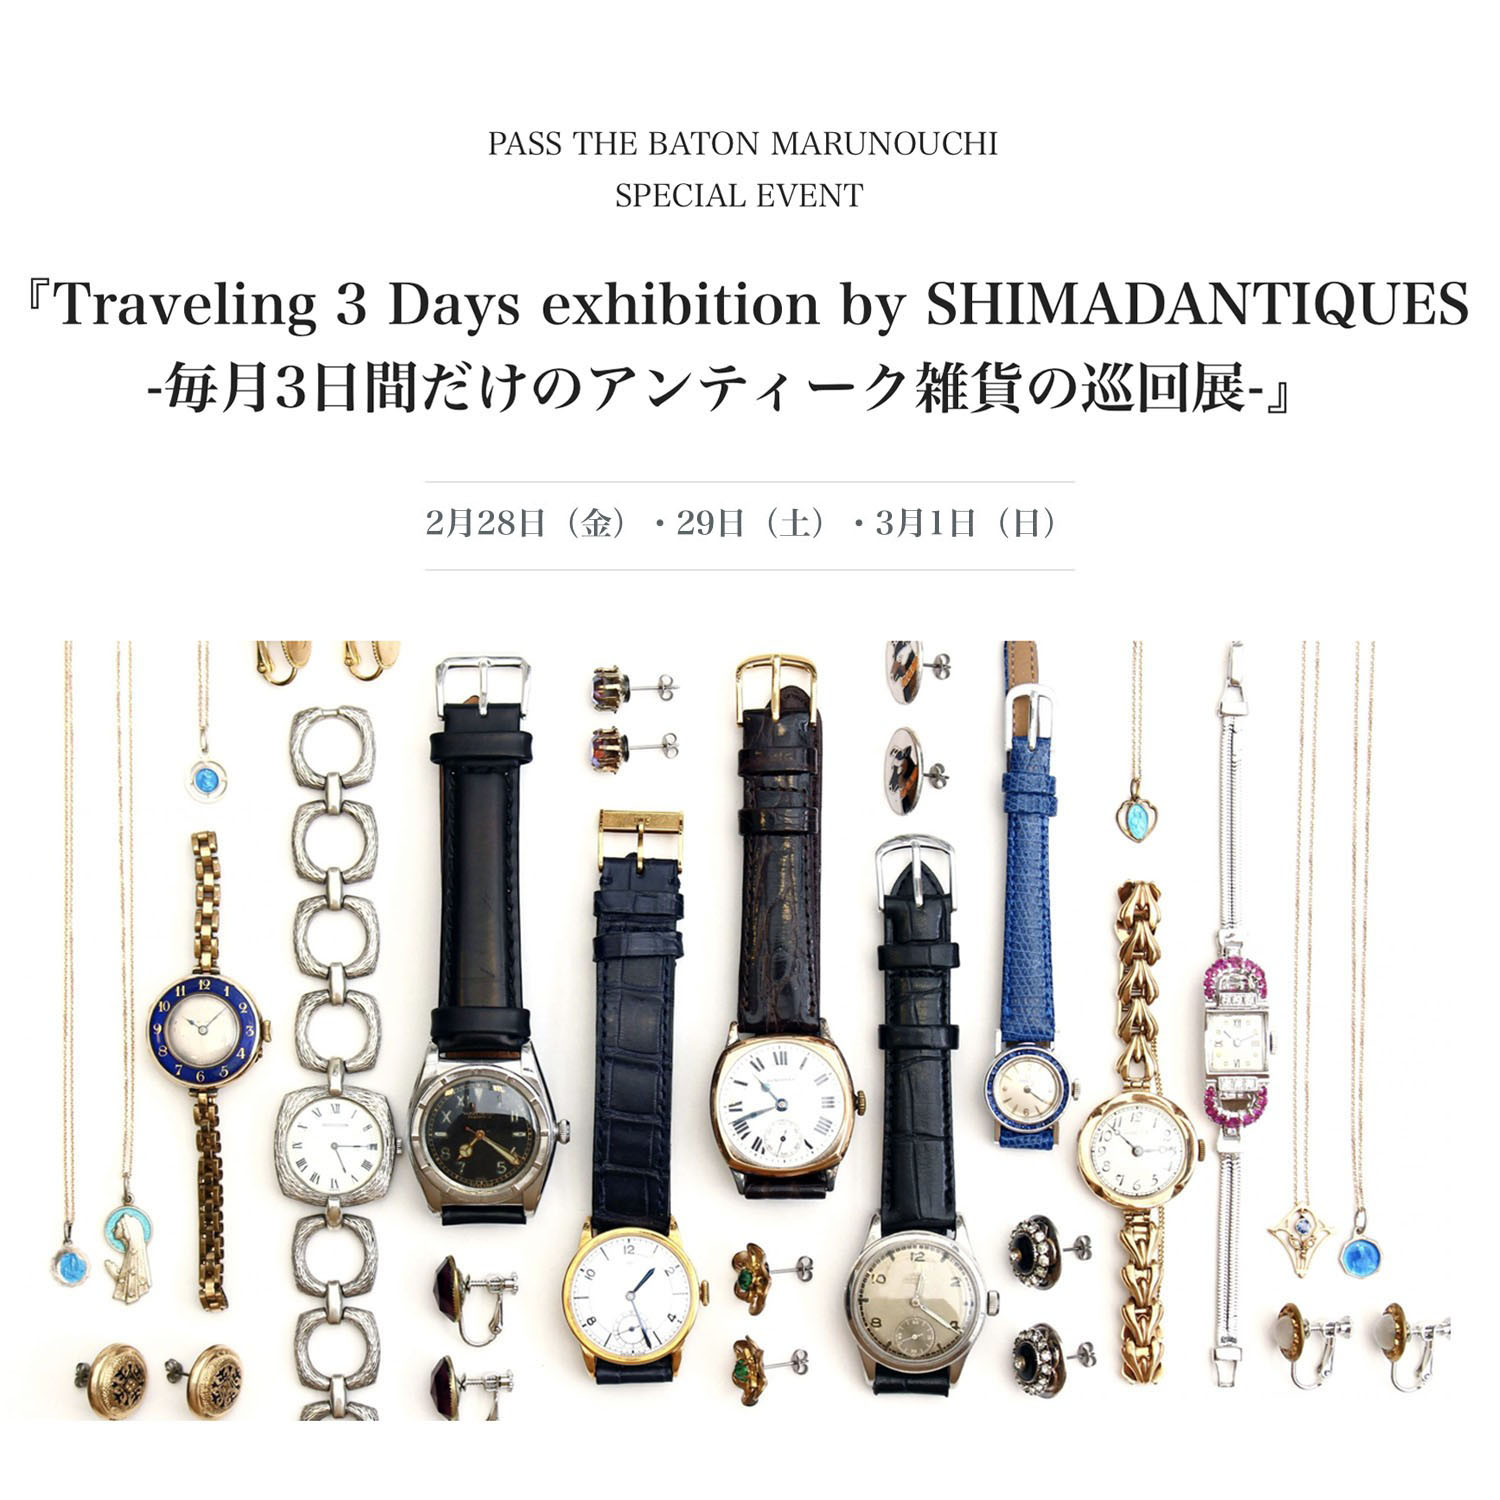 『Traveling 3 Days exhibition by SHIMADANTIQUES』